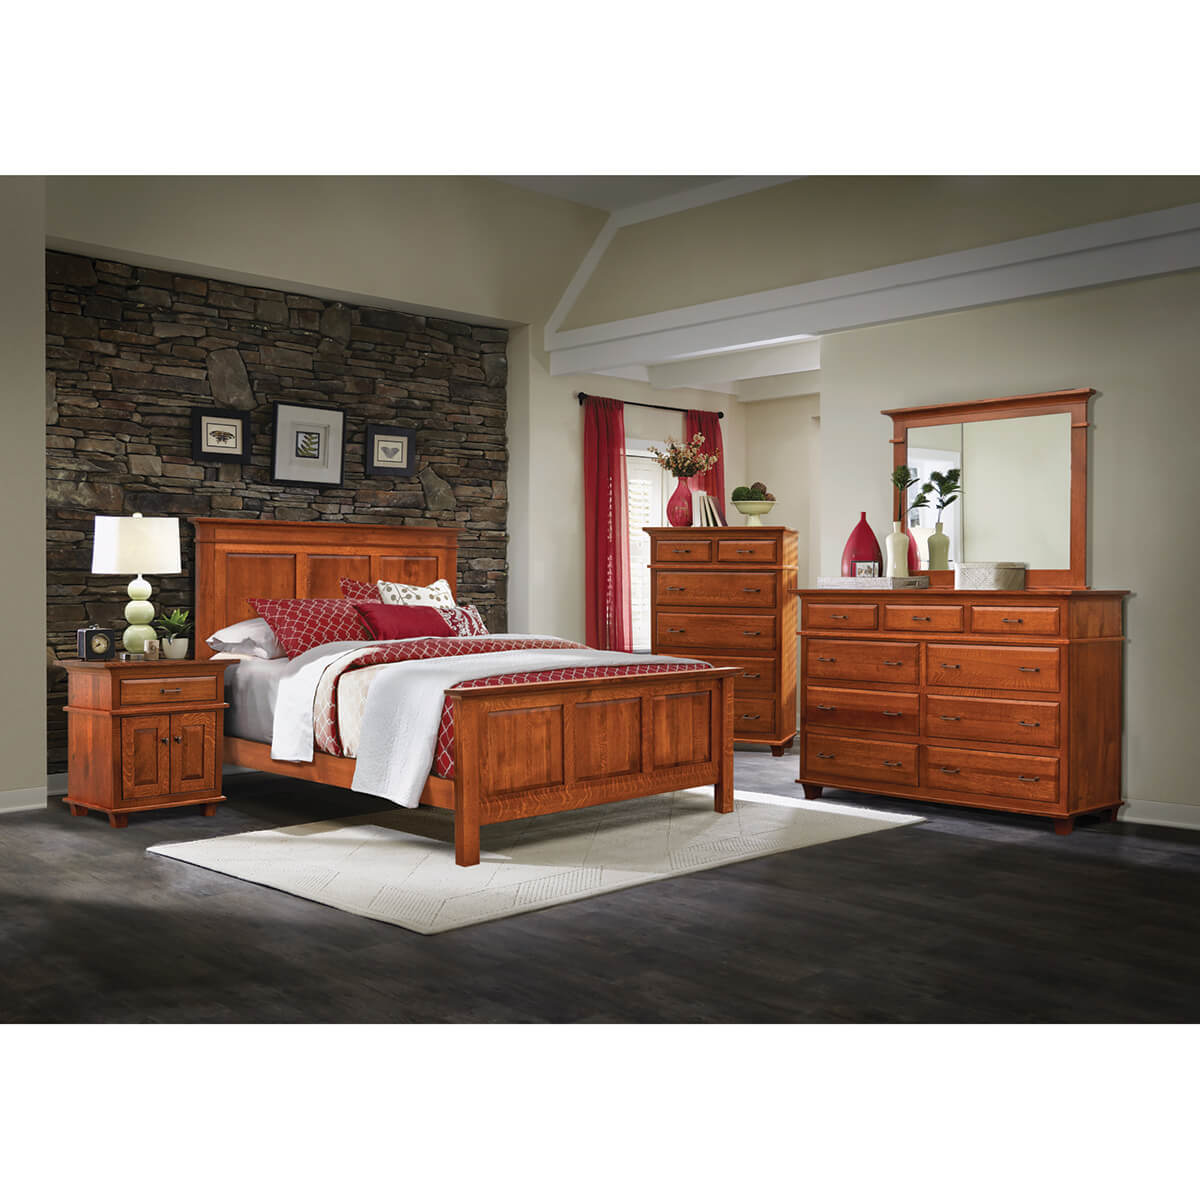 RockwellBedroomCollection105896